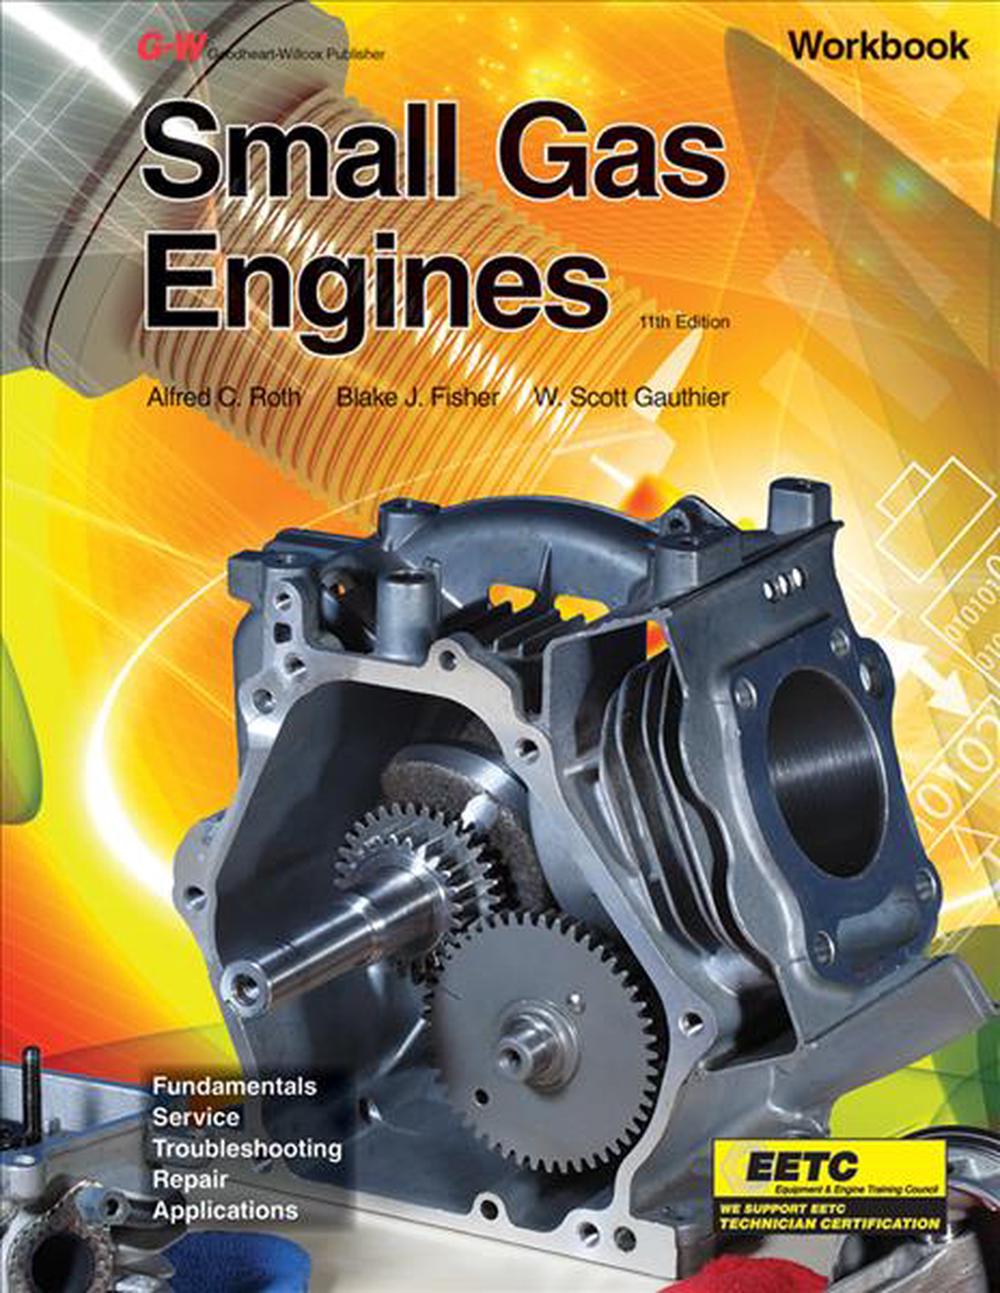 Small Gas Engines, Workbook by Alfred C. Roth (English) Paperback Book